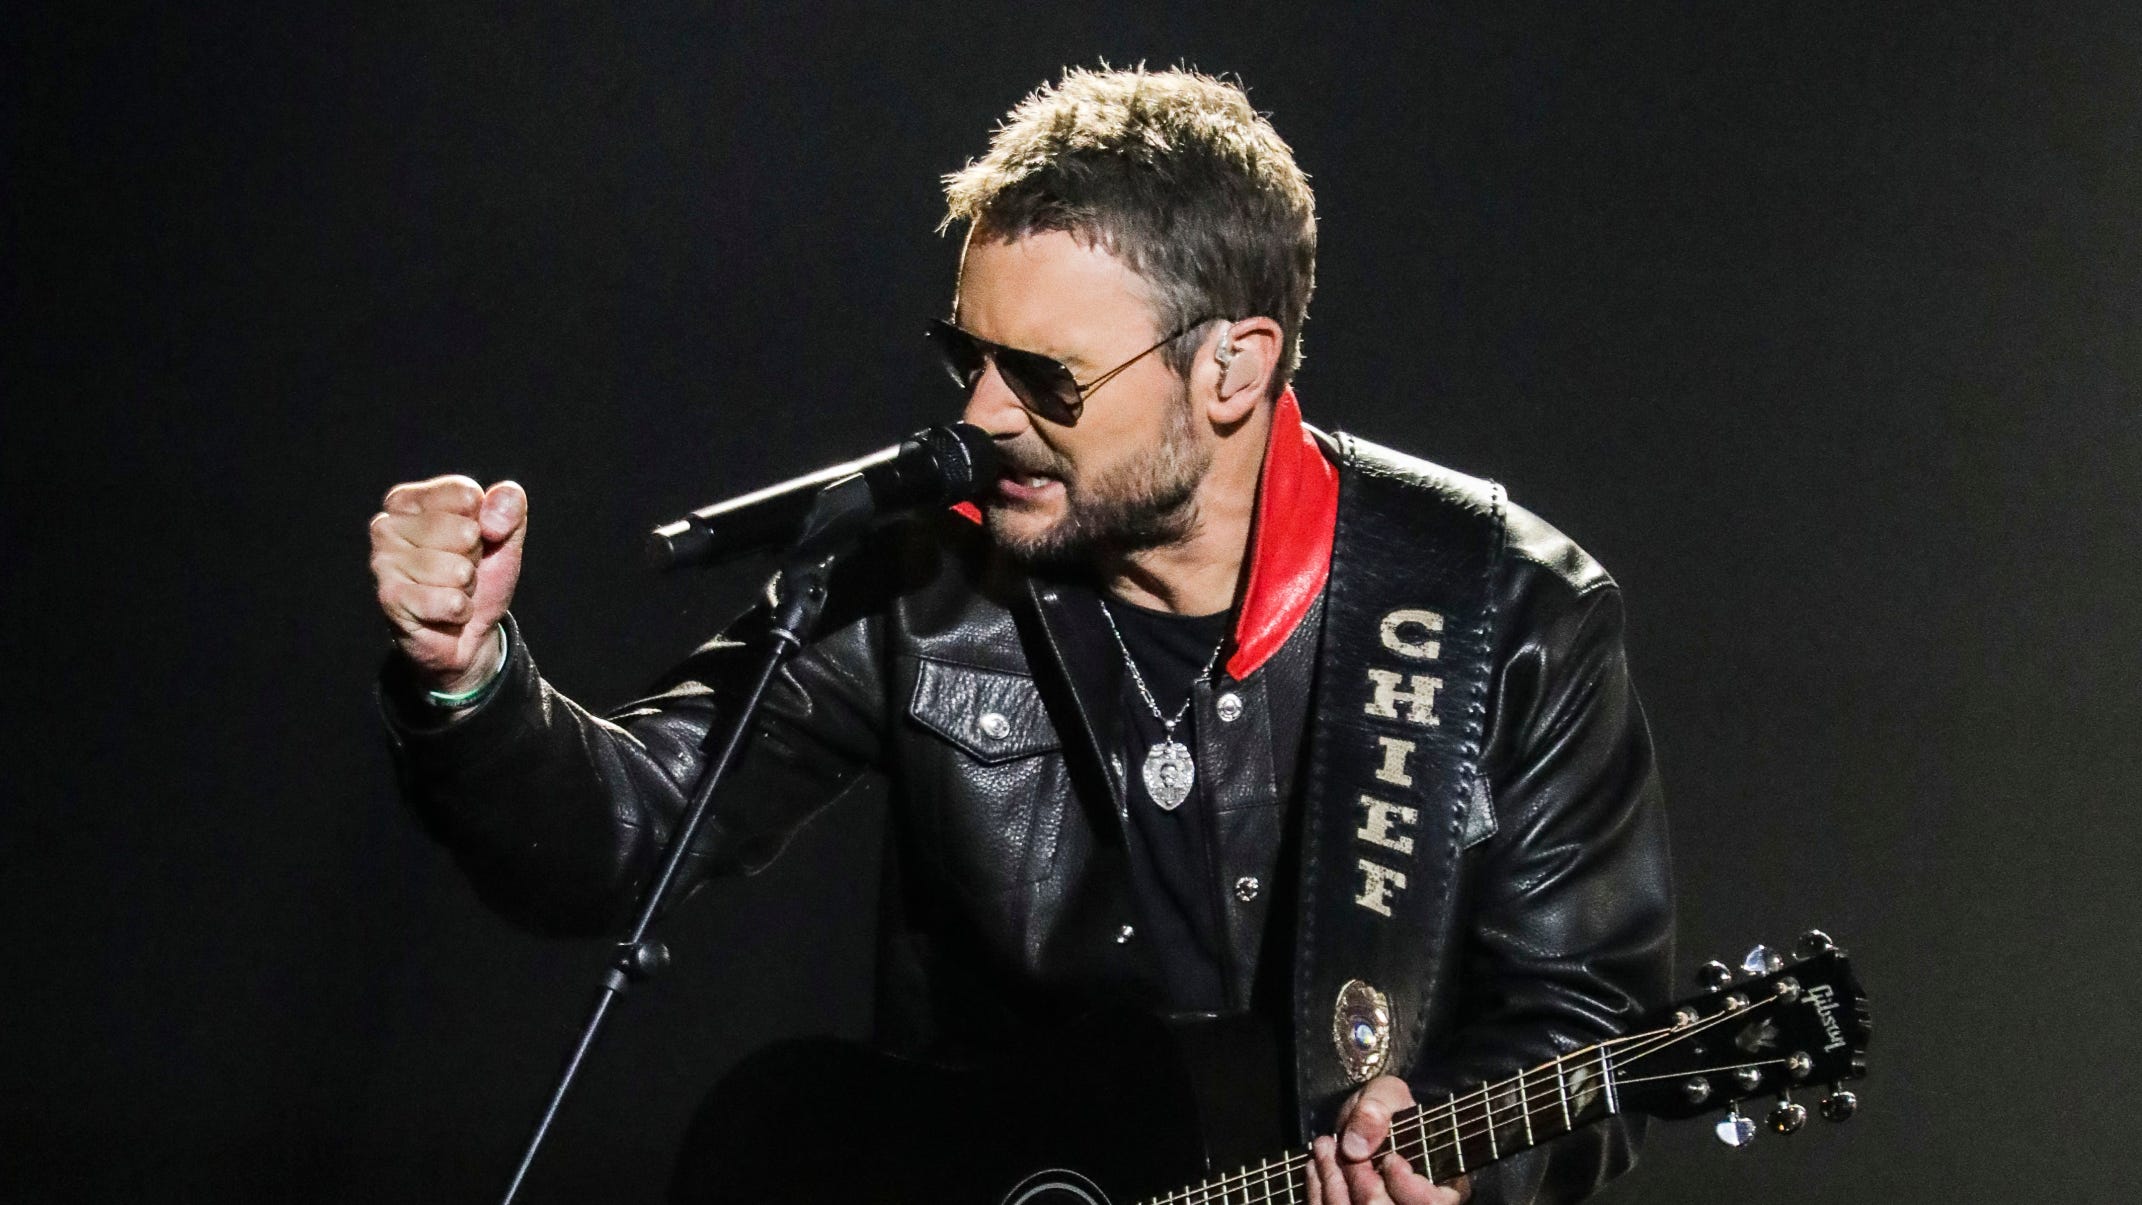 CMA Awards 2020 Eric Church performs new song 'Hell of a View'